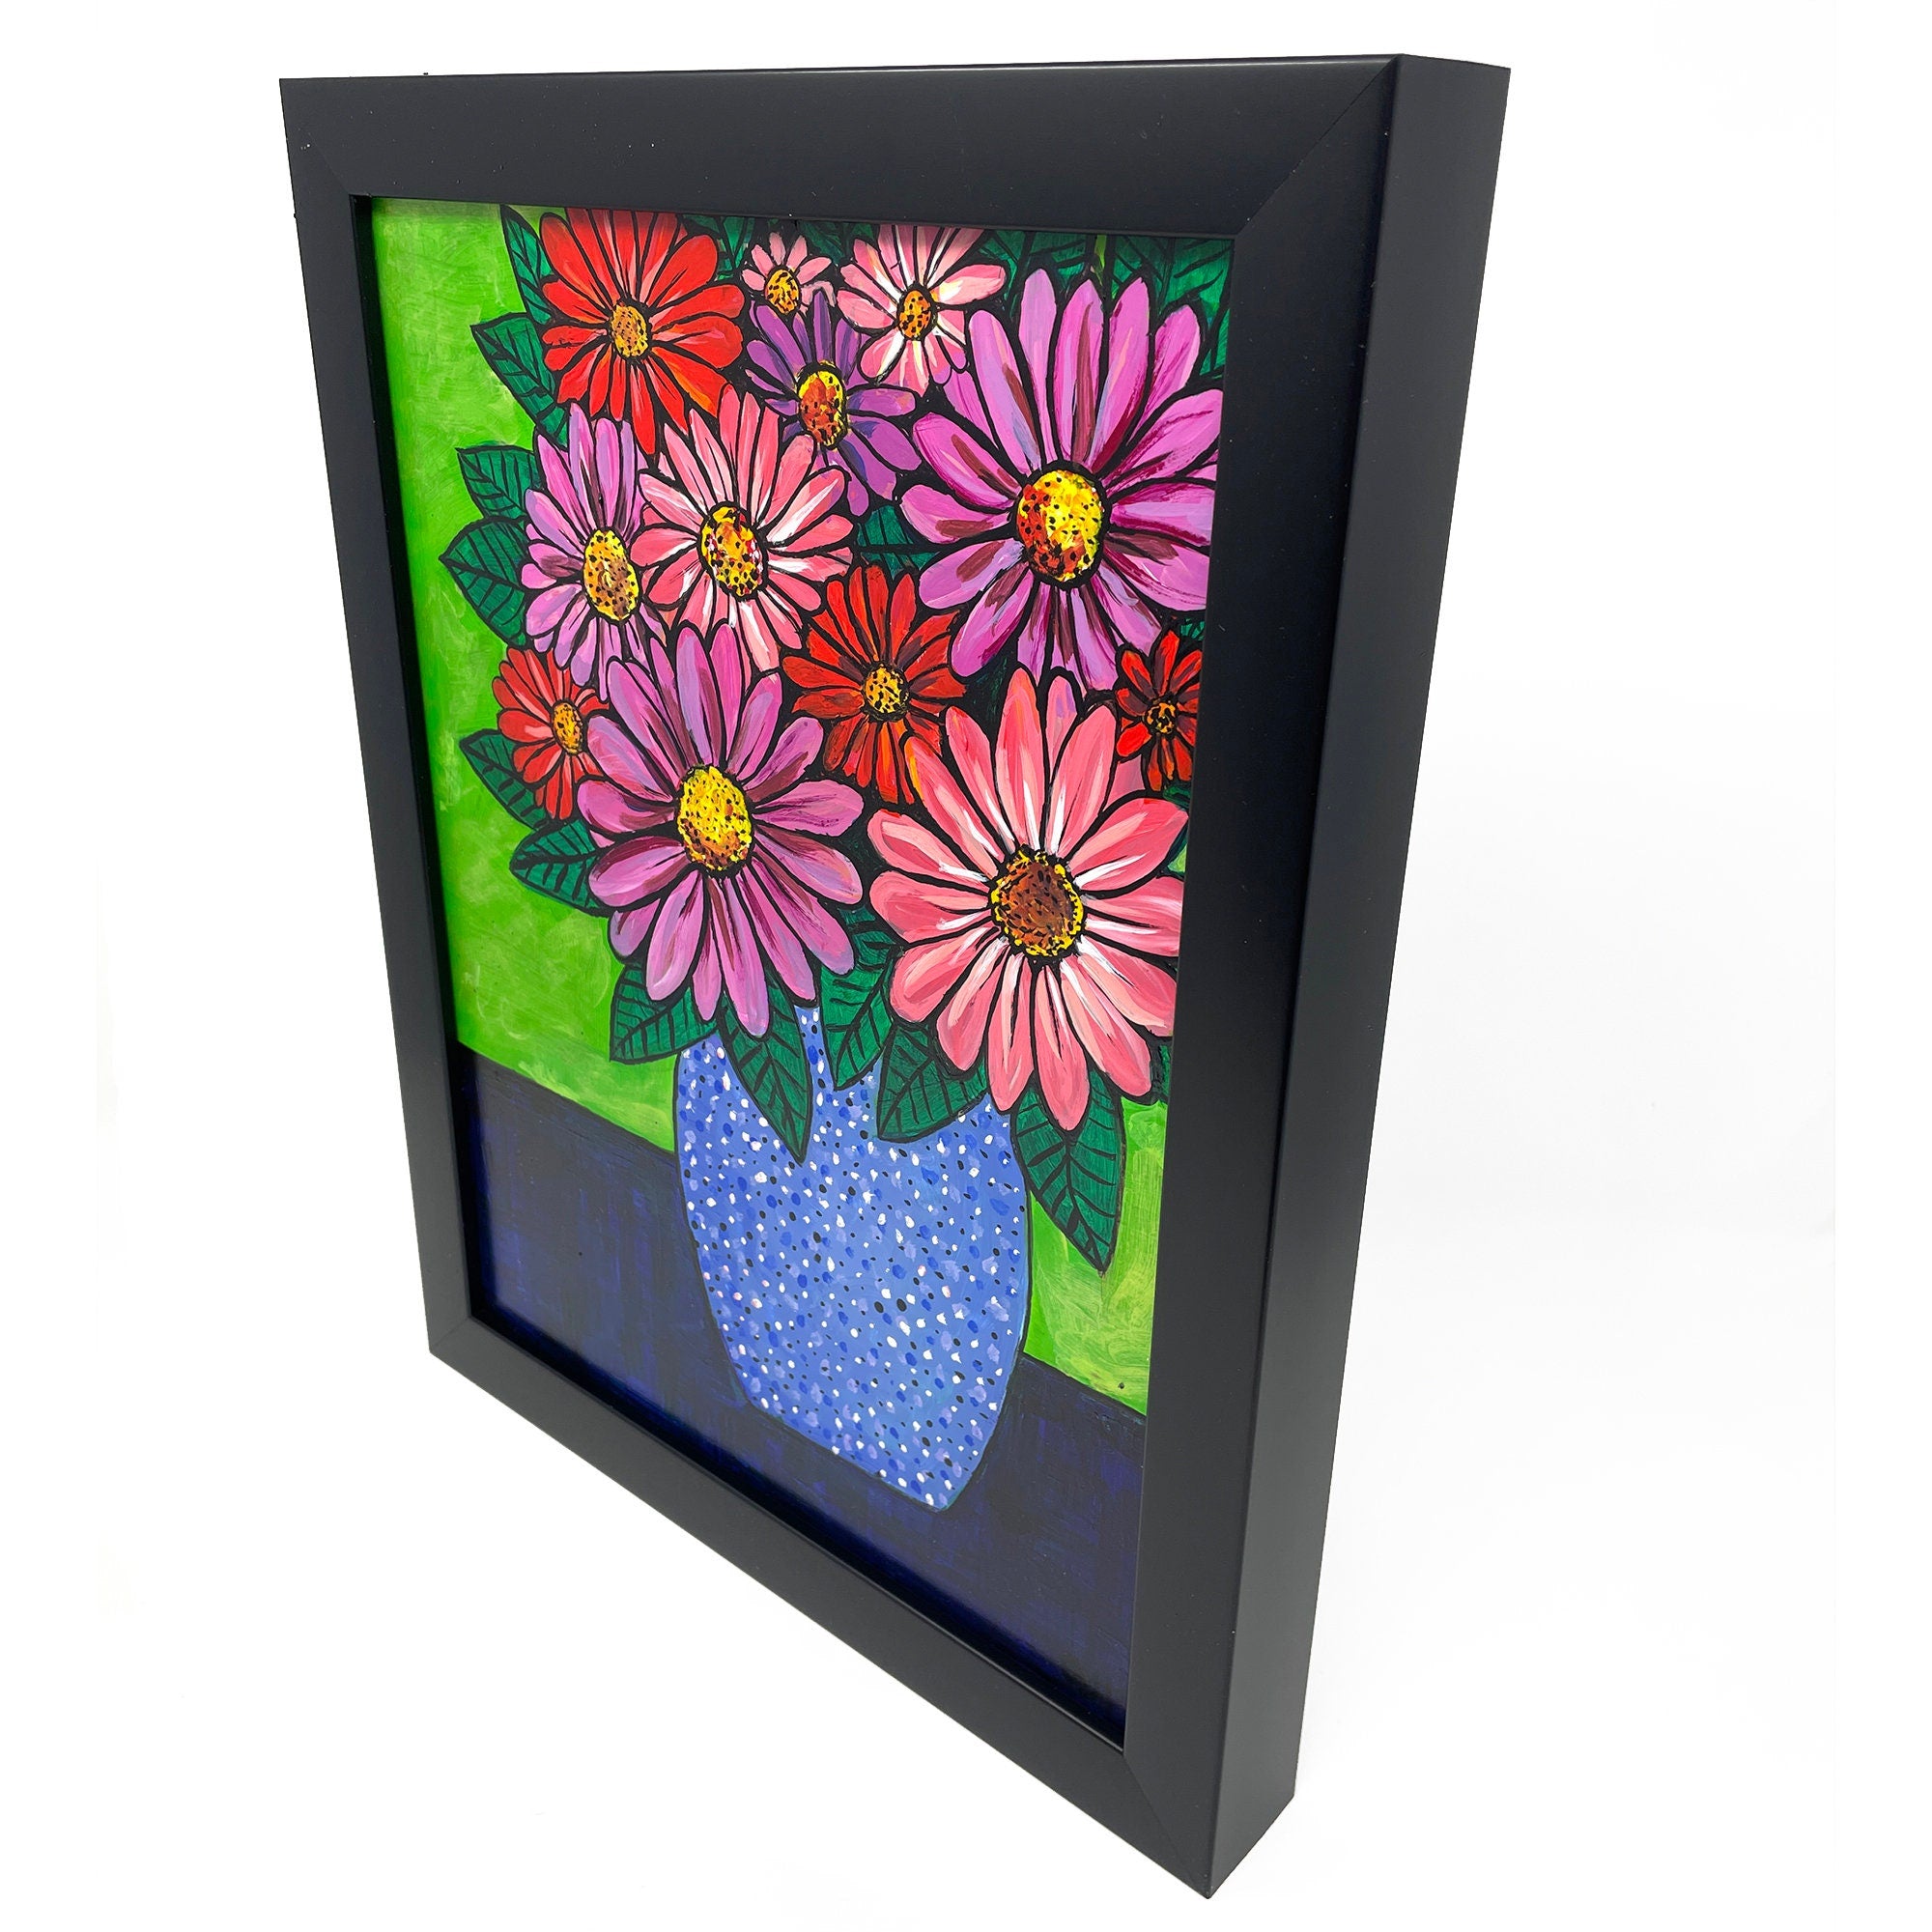 Original Gerbera Daisy Art - Colorful Acrylic Painting featuring Pink, Red, and Purple Flowers in Vase - Still Life - Framed Wall Art